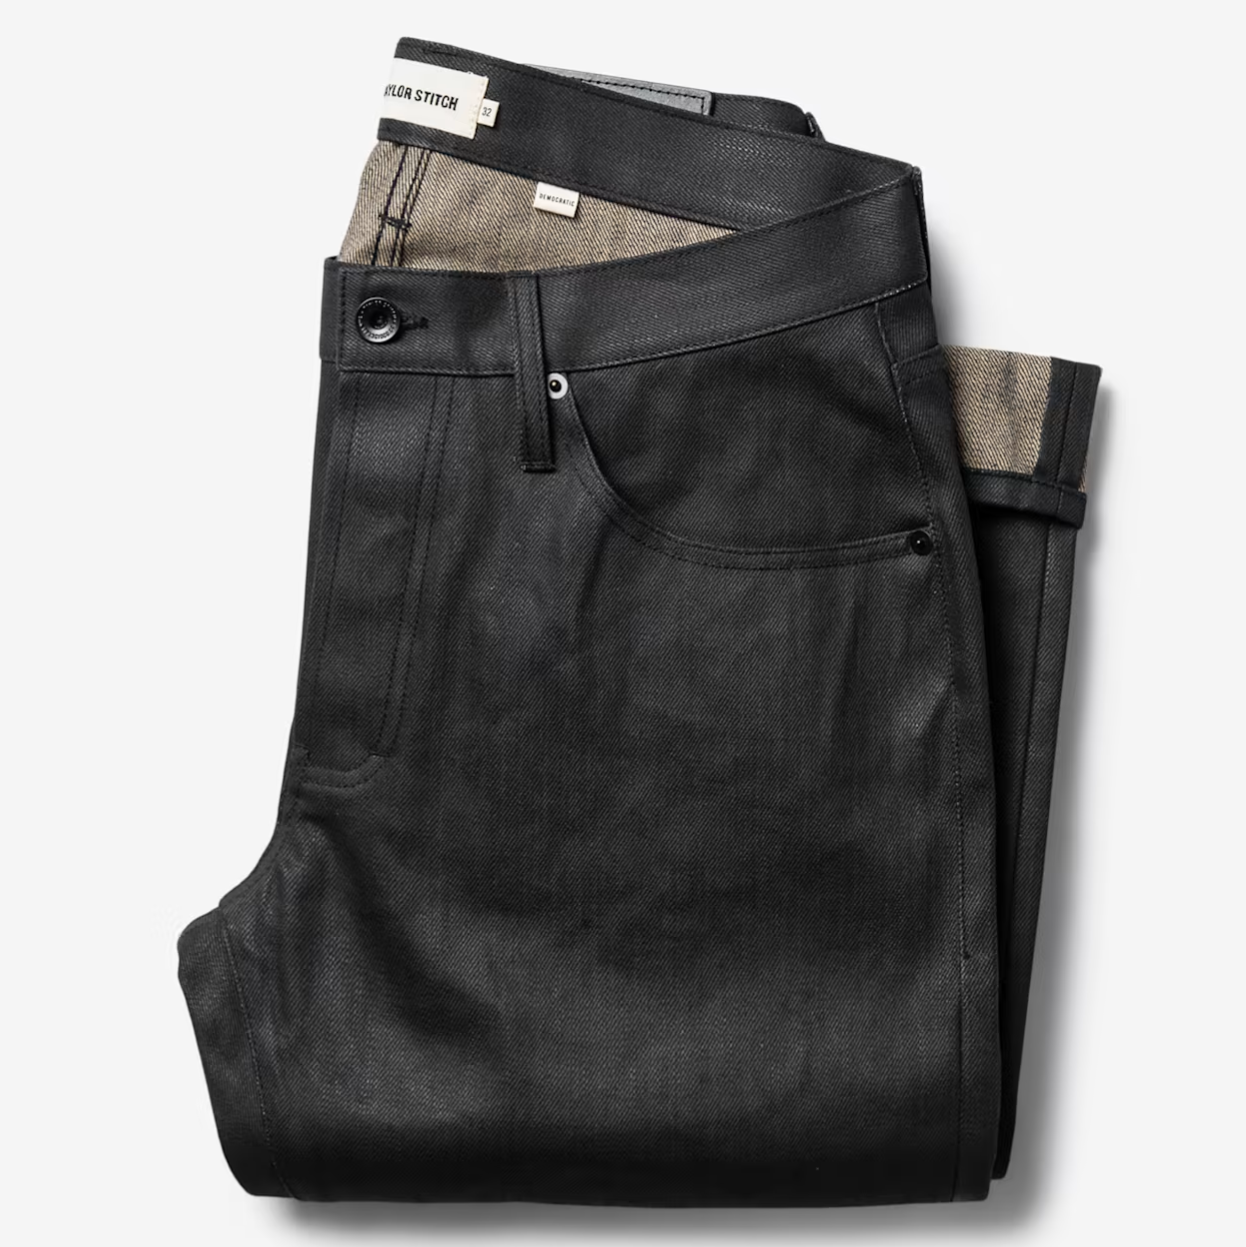 Taylor Stitch Slim Jean in Black Over-Dye Selvage